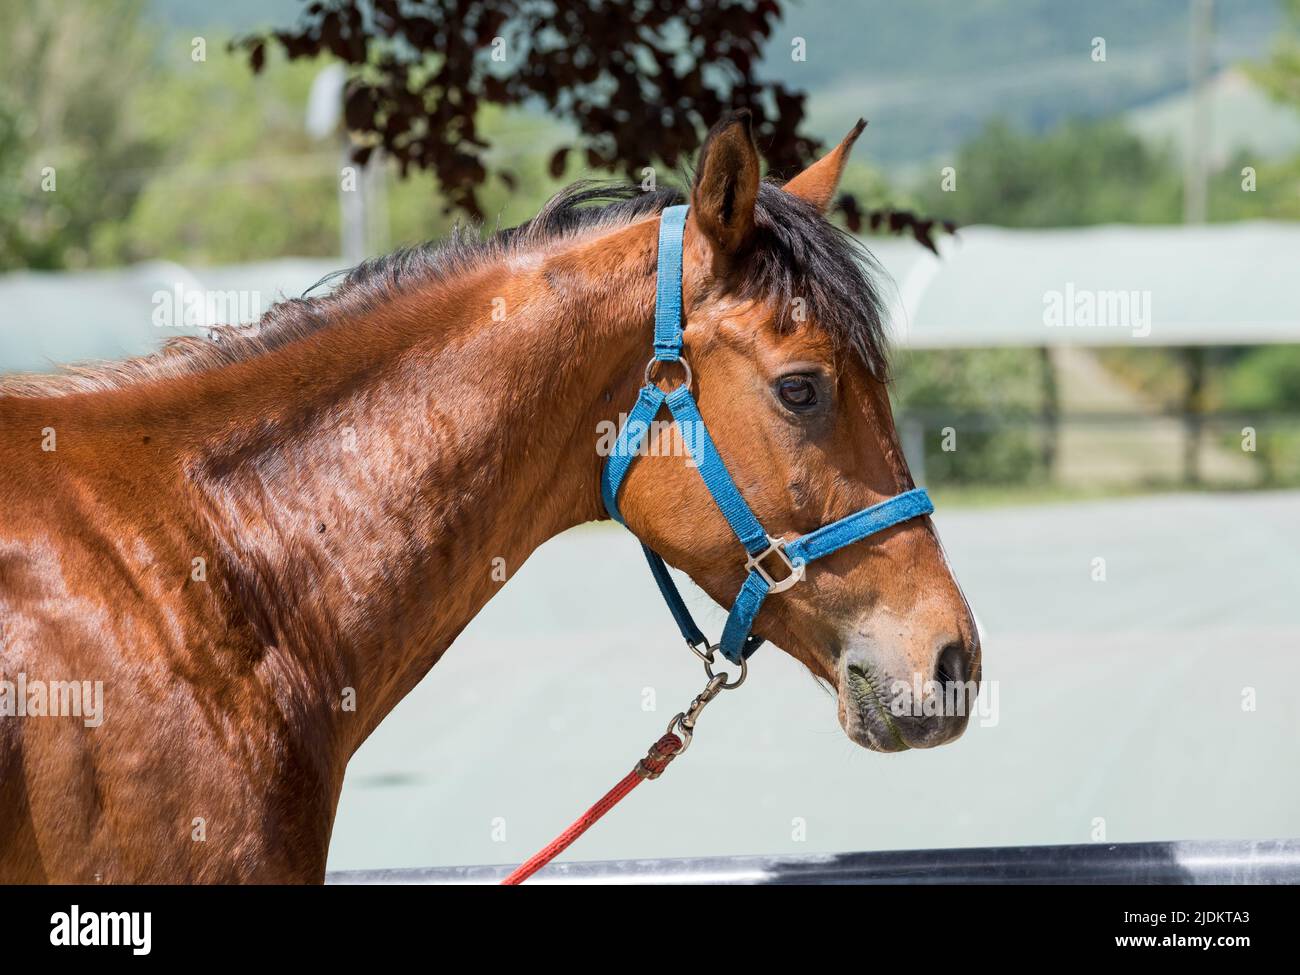 Side view head portrait of a brown horse in halter and lead rein outdoors in a paddock Stock Photo